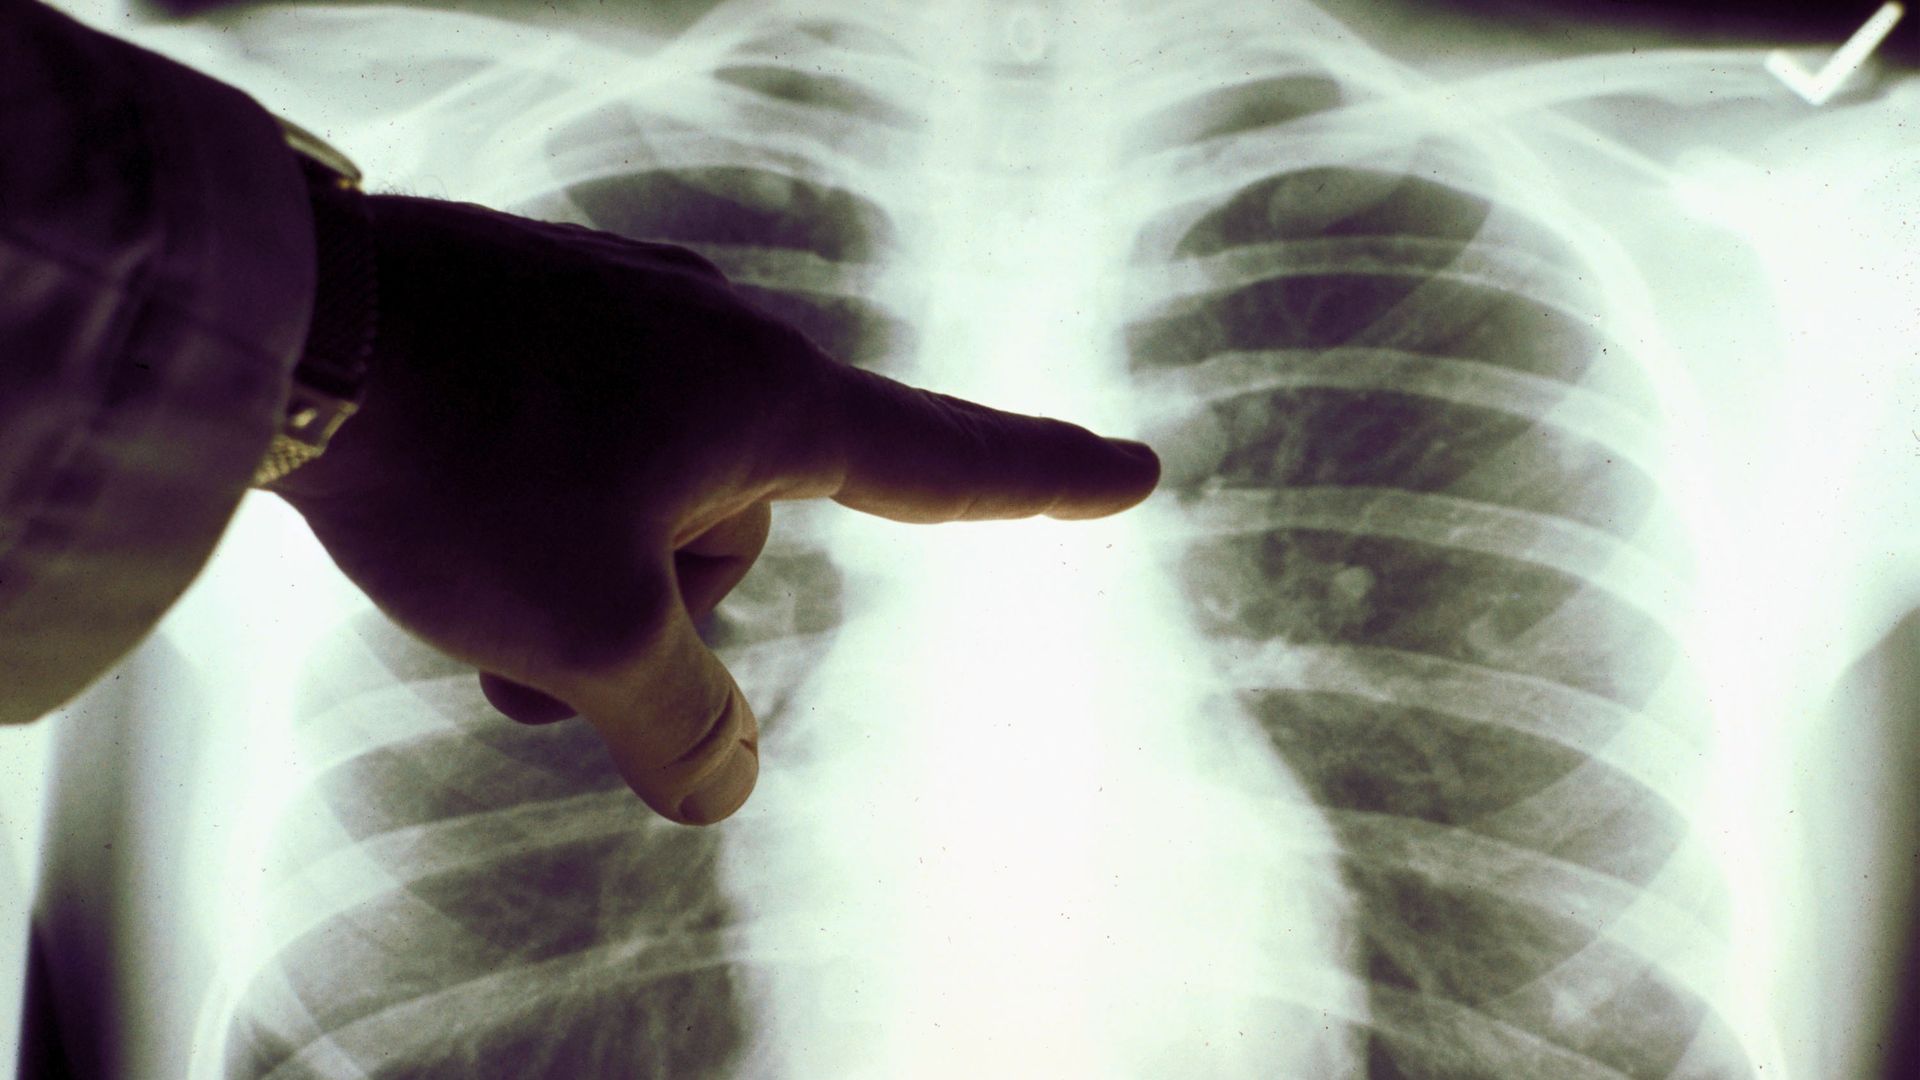 A hand pointing at an x-ray of human lungs.